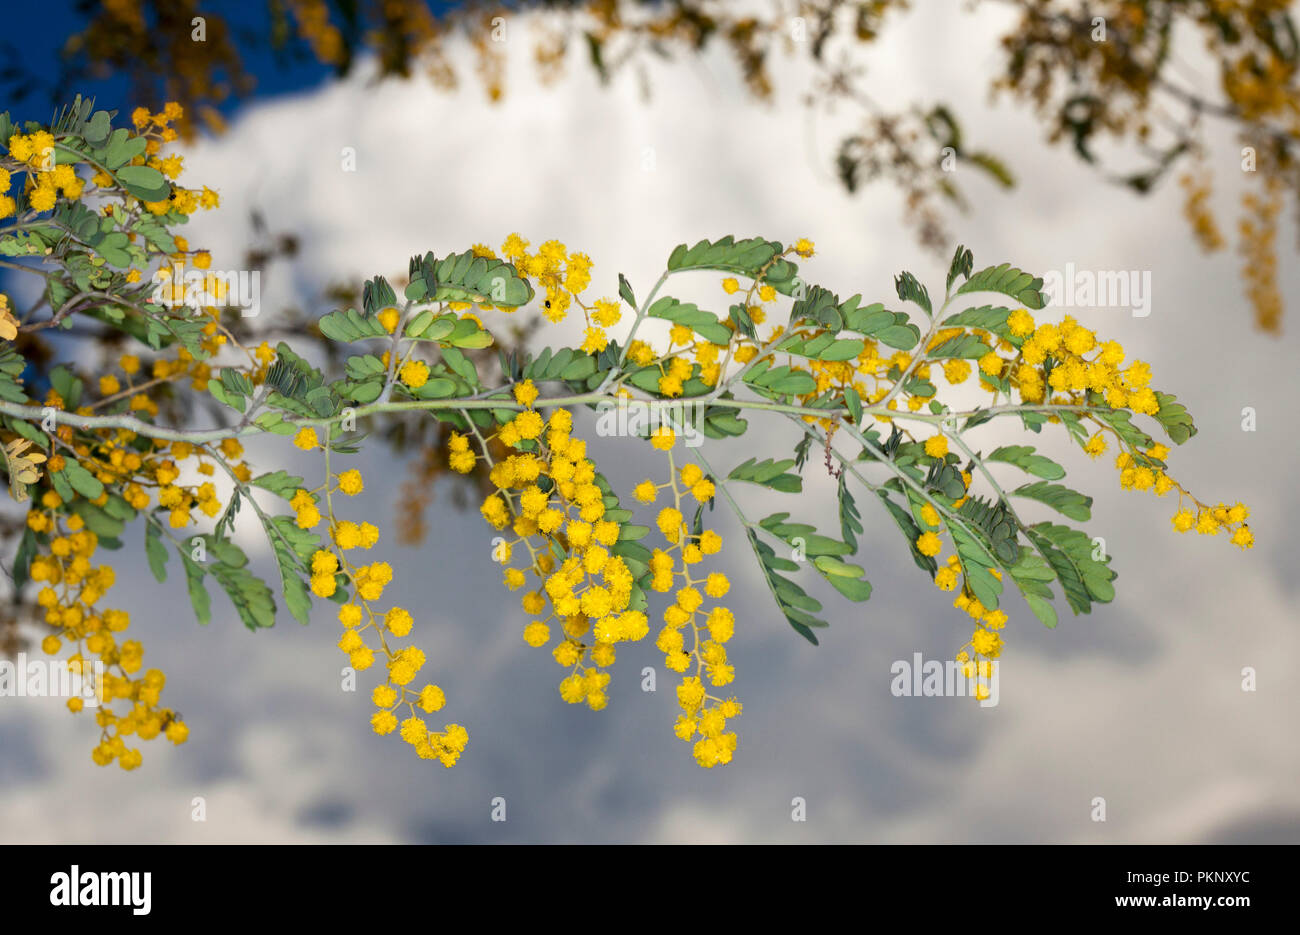 Australian wildflowers, cluster of golden yellow Acacia / wattle flowers and green leaves on background of stormy sky Stock Photo